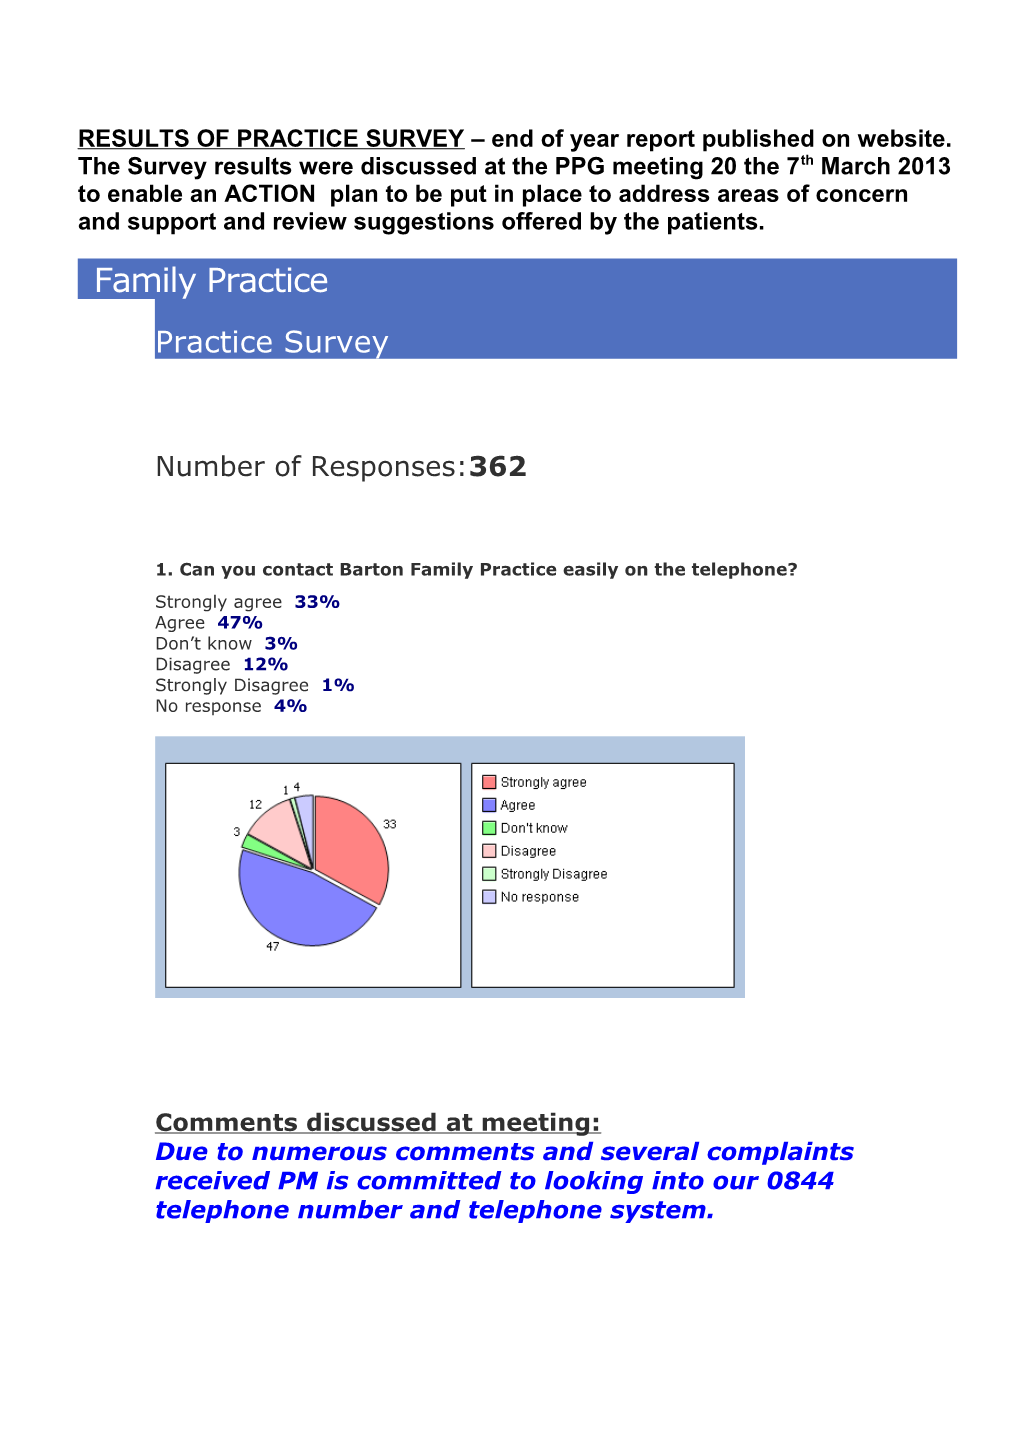 RESULTS of PRACTICE SURVEY End of Year Report Published on Website